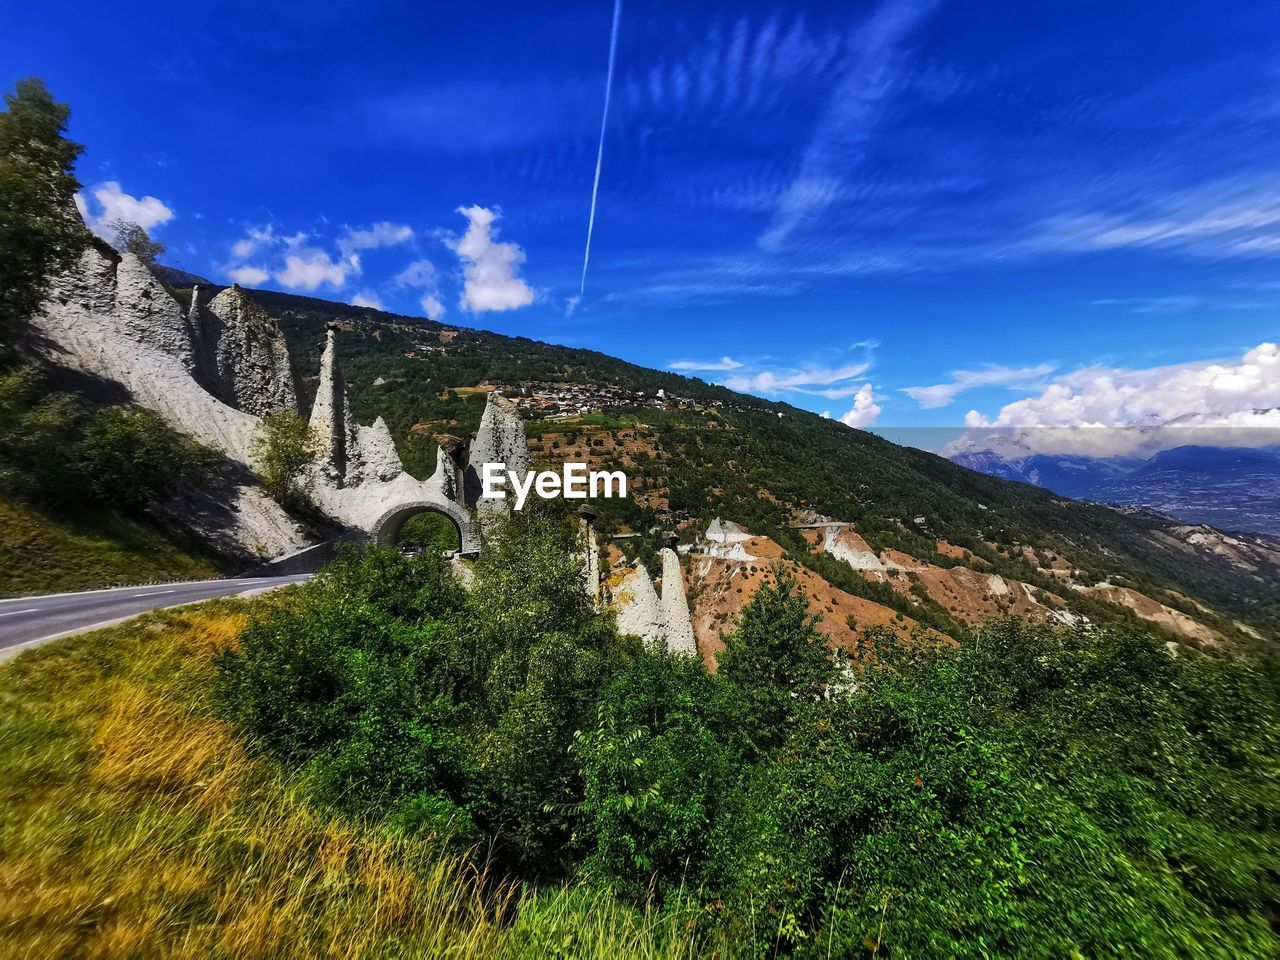 sky, mountain range, scenics - nature, mountain, nature, plant, environment, cloud, beauty in nature, landscape, land, tree, architecture, no people, travel destinations, travel, mountain pass, blue, non-urban scene, tranquility, tranquil scene, built structure, green, outdoors, valley, grass, plateau, water, road, tourism, day, ridge, idyllic, transportation, forest, meadow, wilderness, building